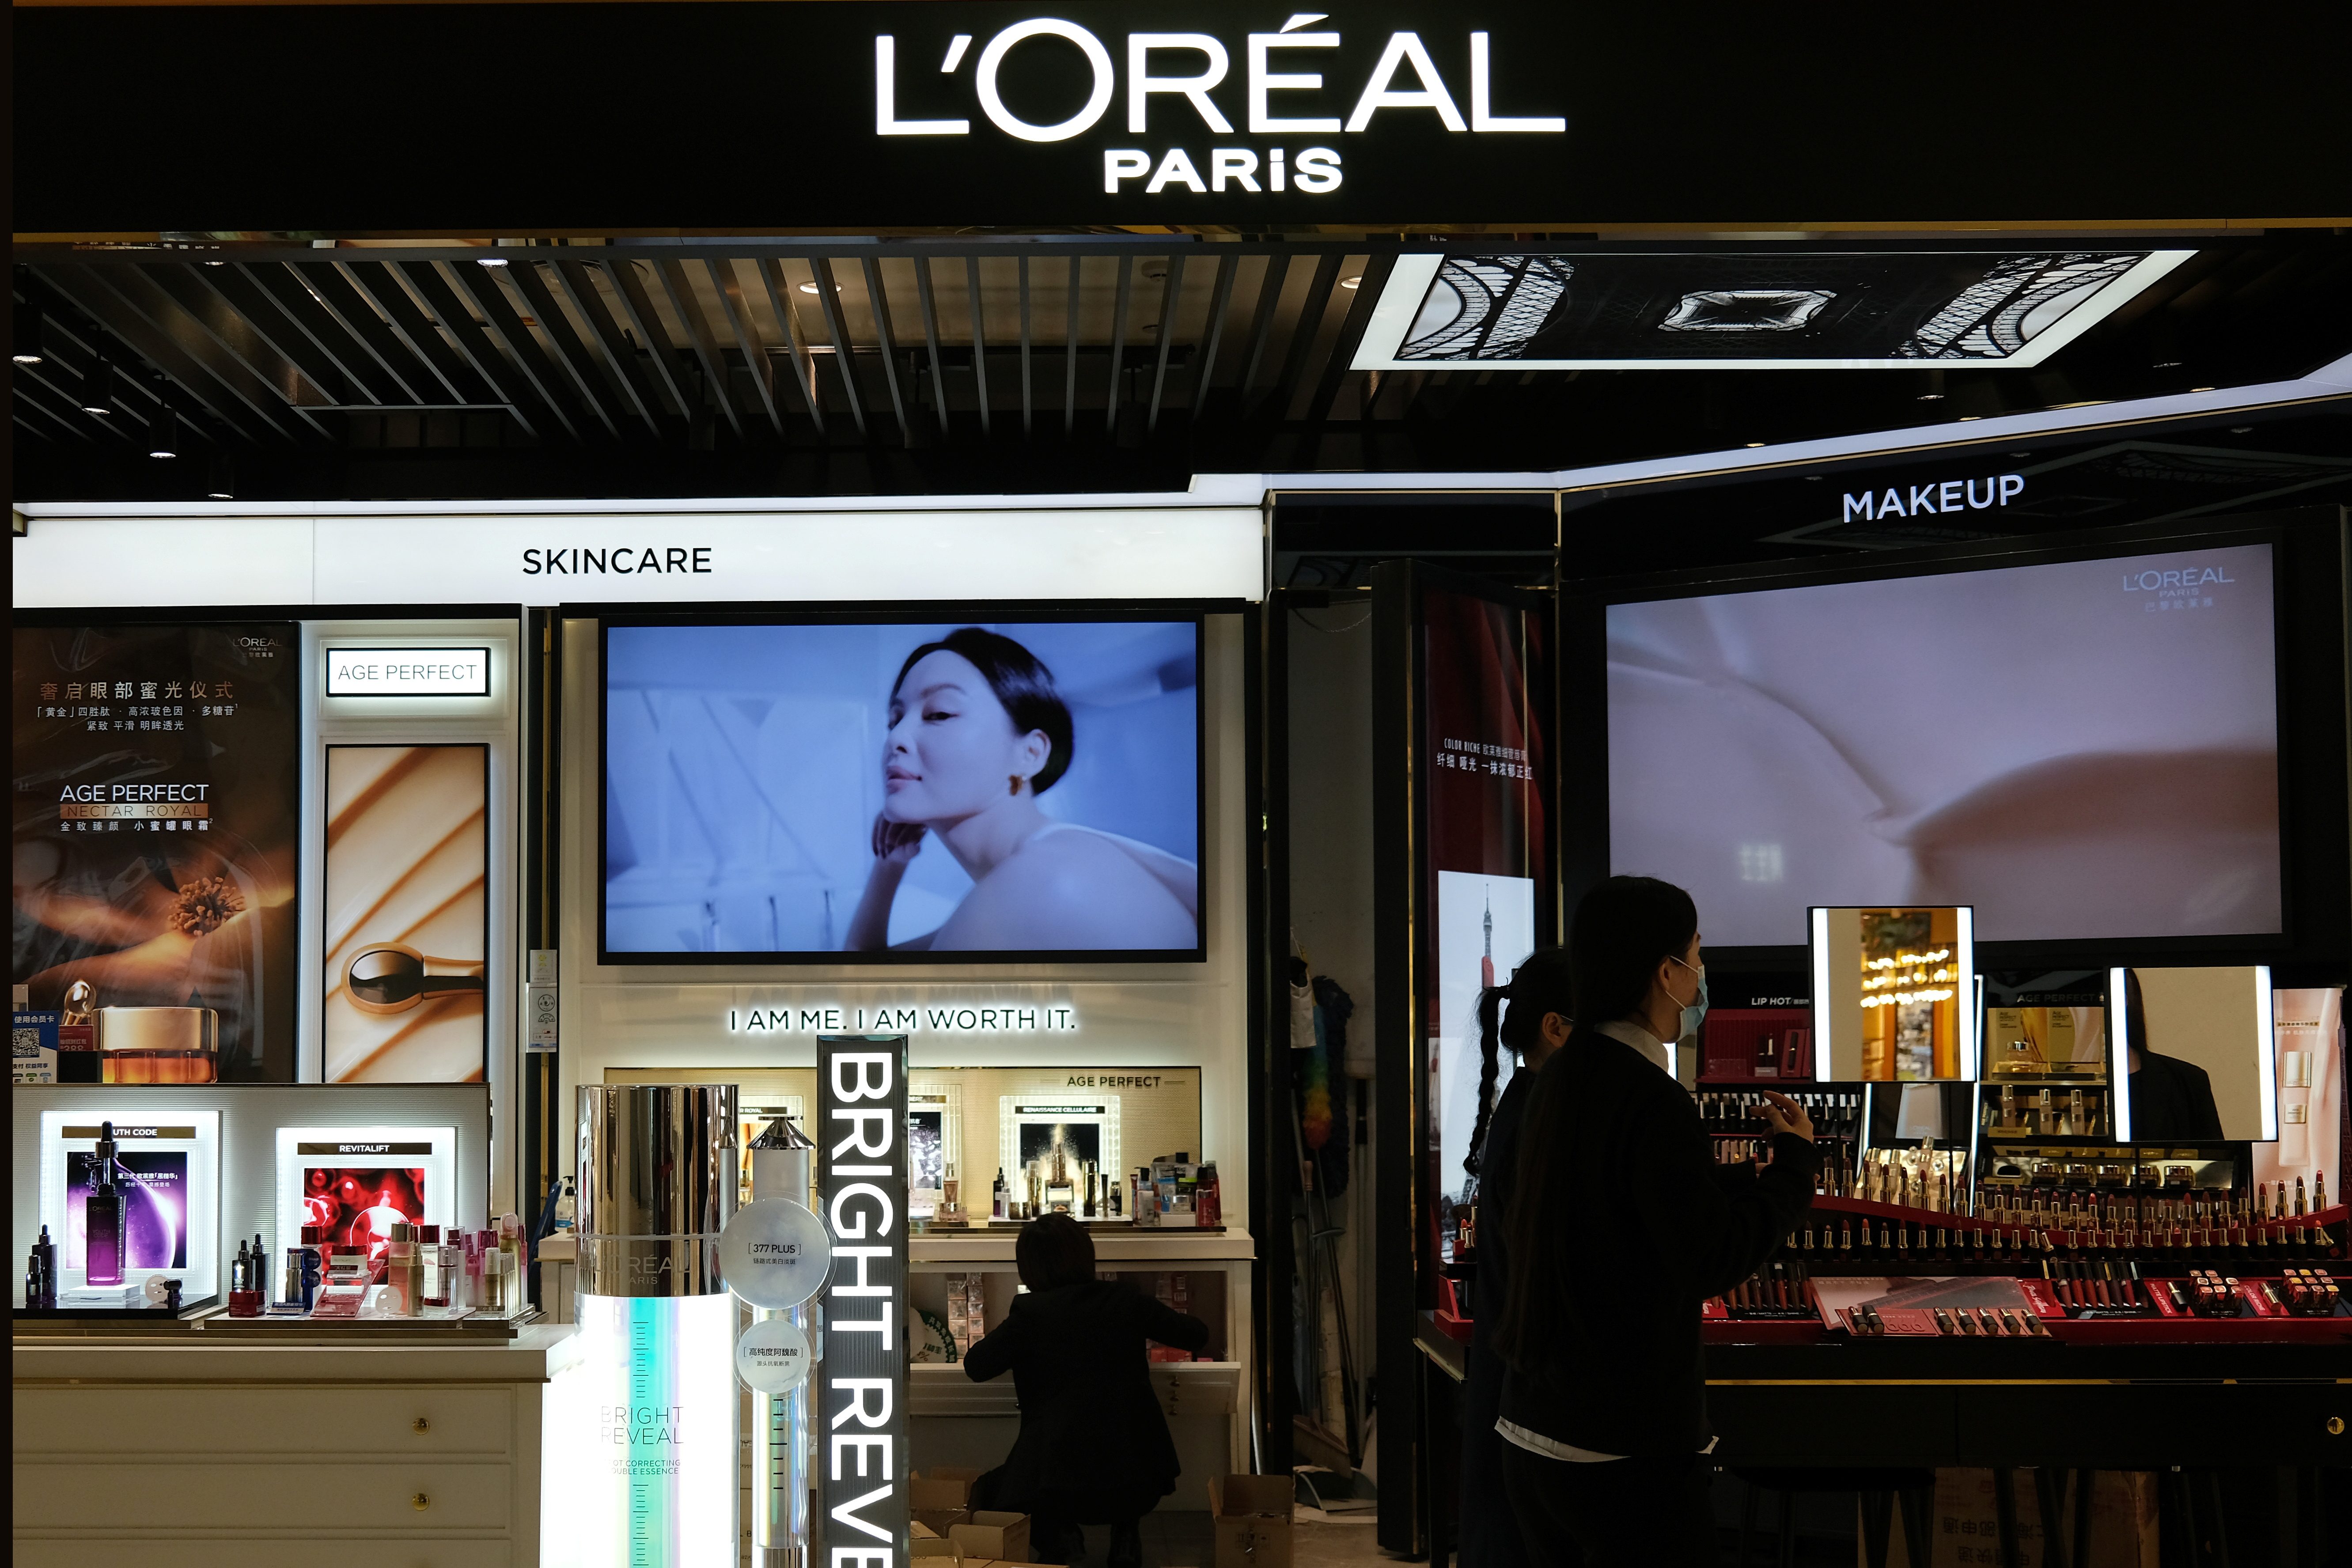 L’Oreal says it reached agreement with Chinese influencers after public dispute